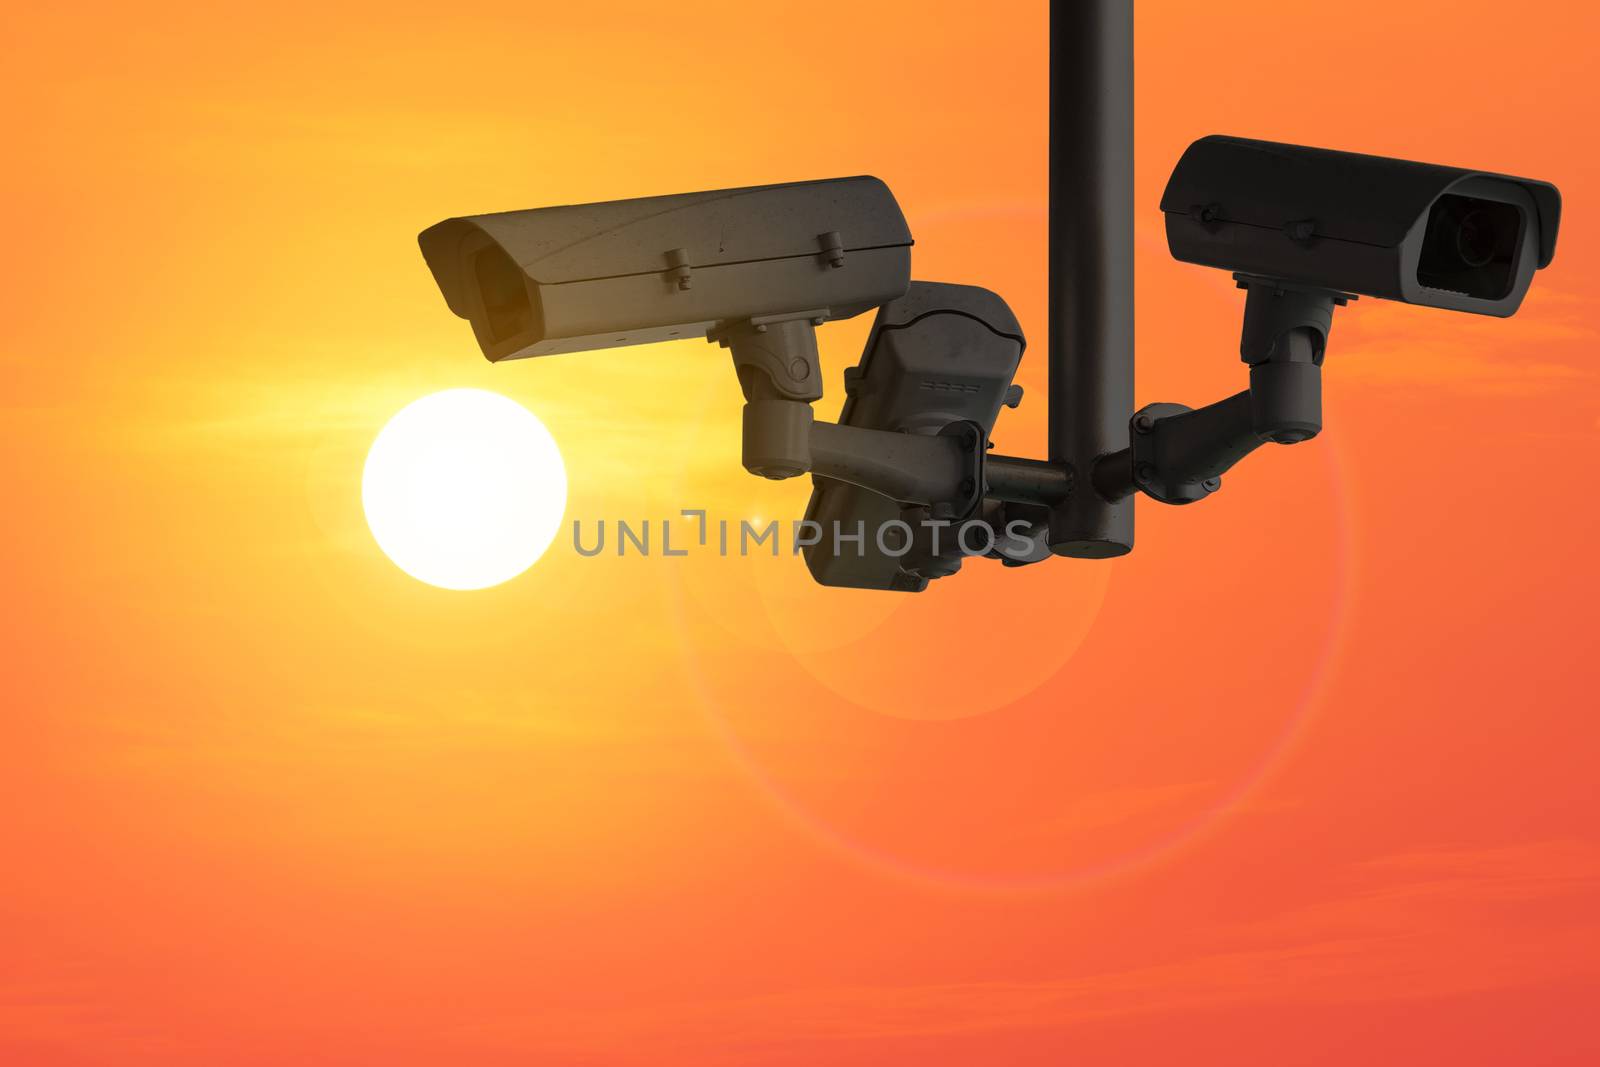 Tough cameras can record events such as traffic, accidents. And also prevent the thief.